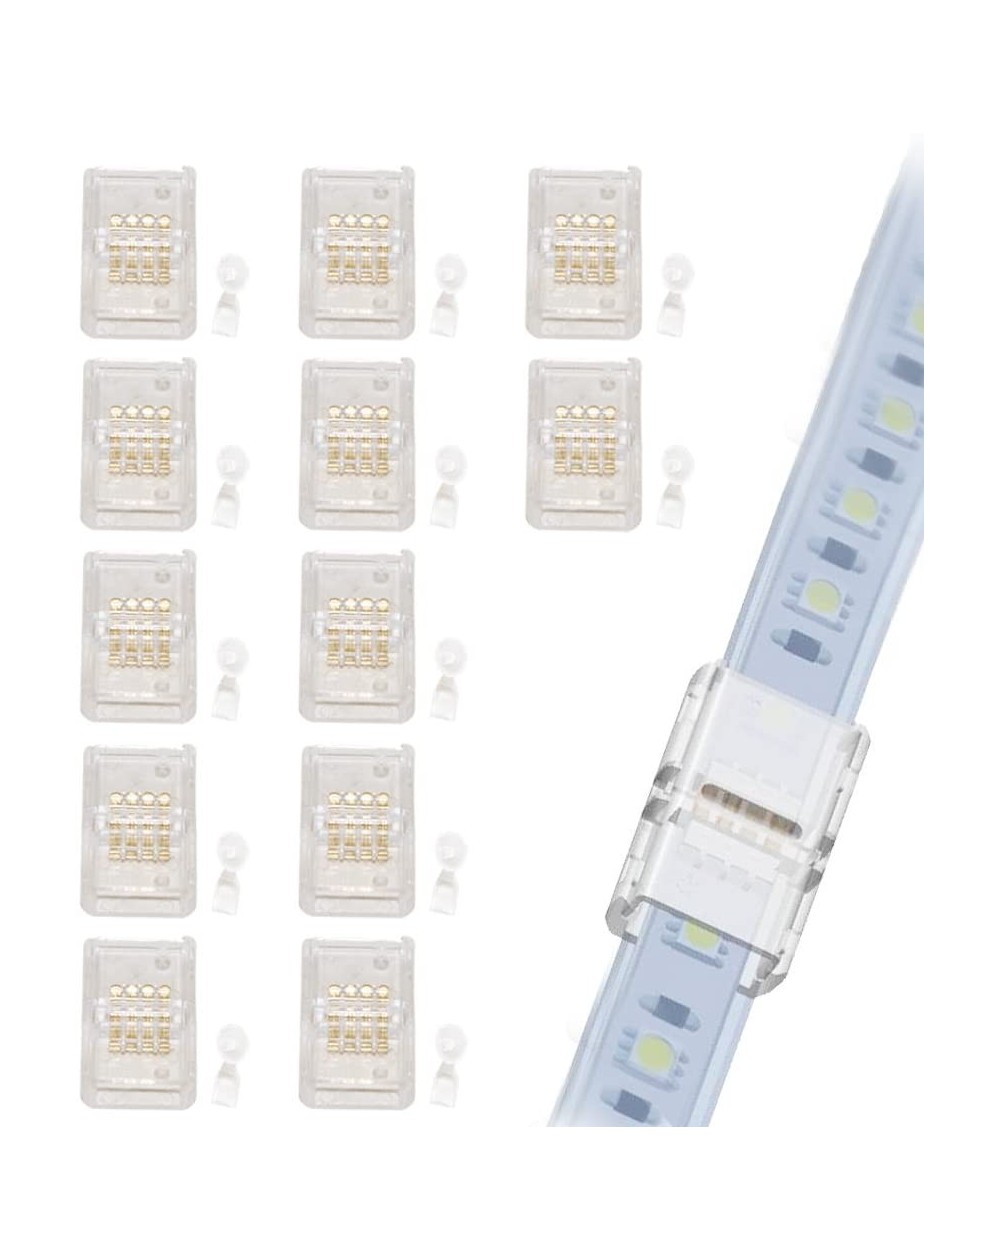 Indoor String Lights LED Connector for 10MM Wide IP68 RGB LED Strip Light- Strip to Strip Quick Connection (12Pcs 4-Pin Strip...